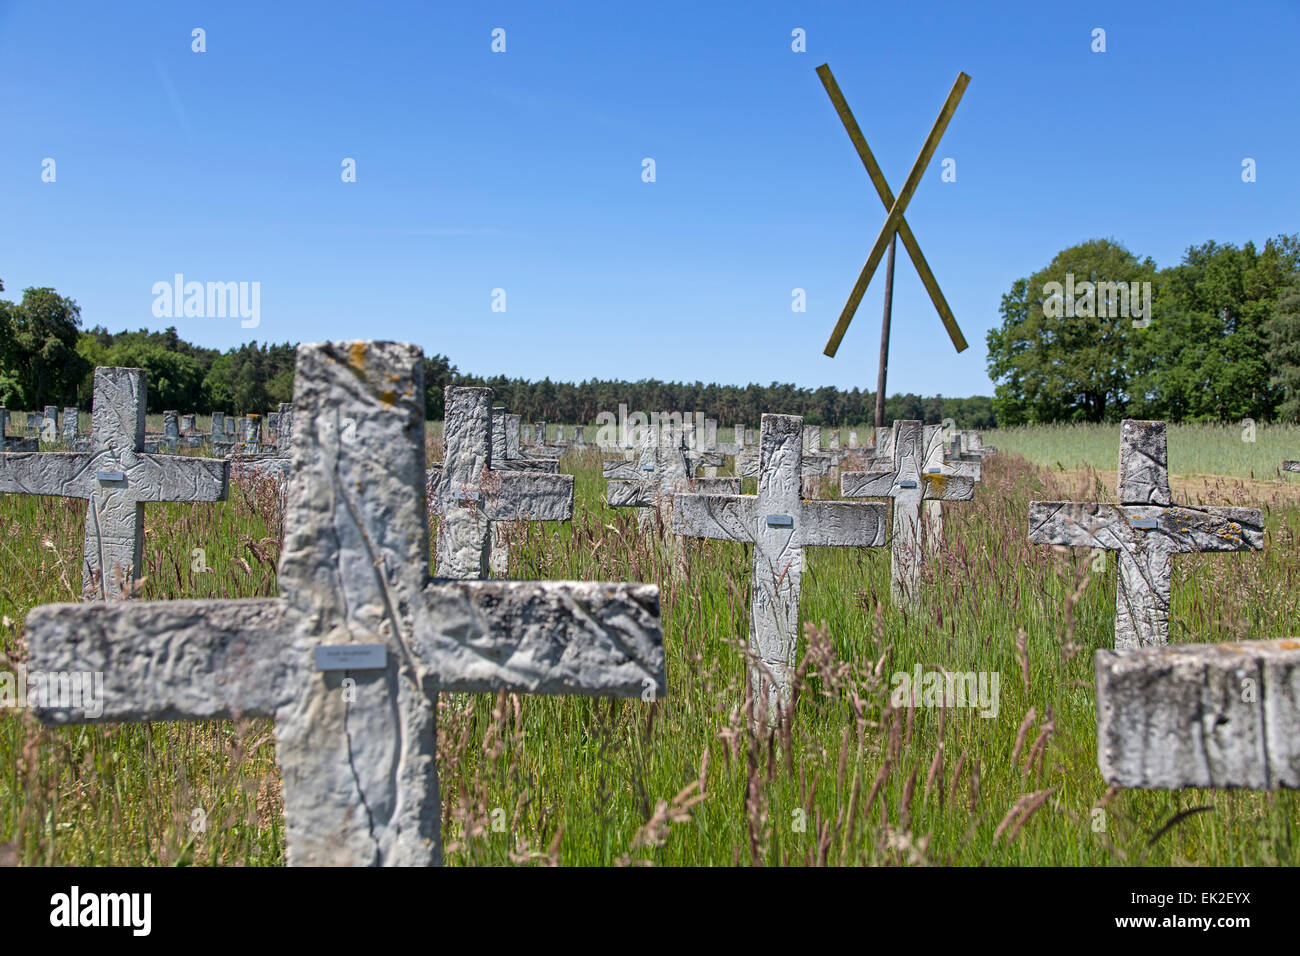 Symbolically cemetery of member of German parliament, Lower Saxony, Germany, Europe Stock Photo